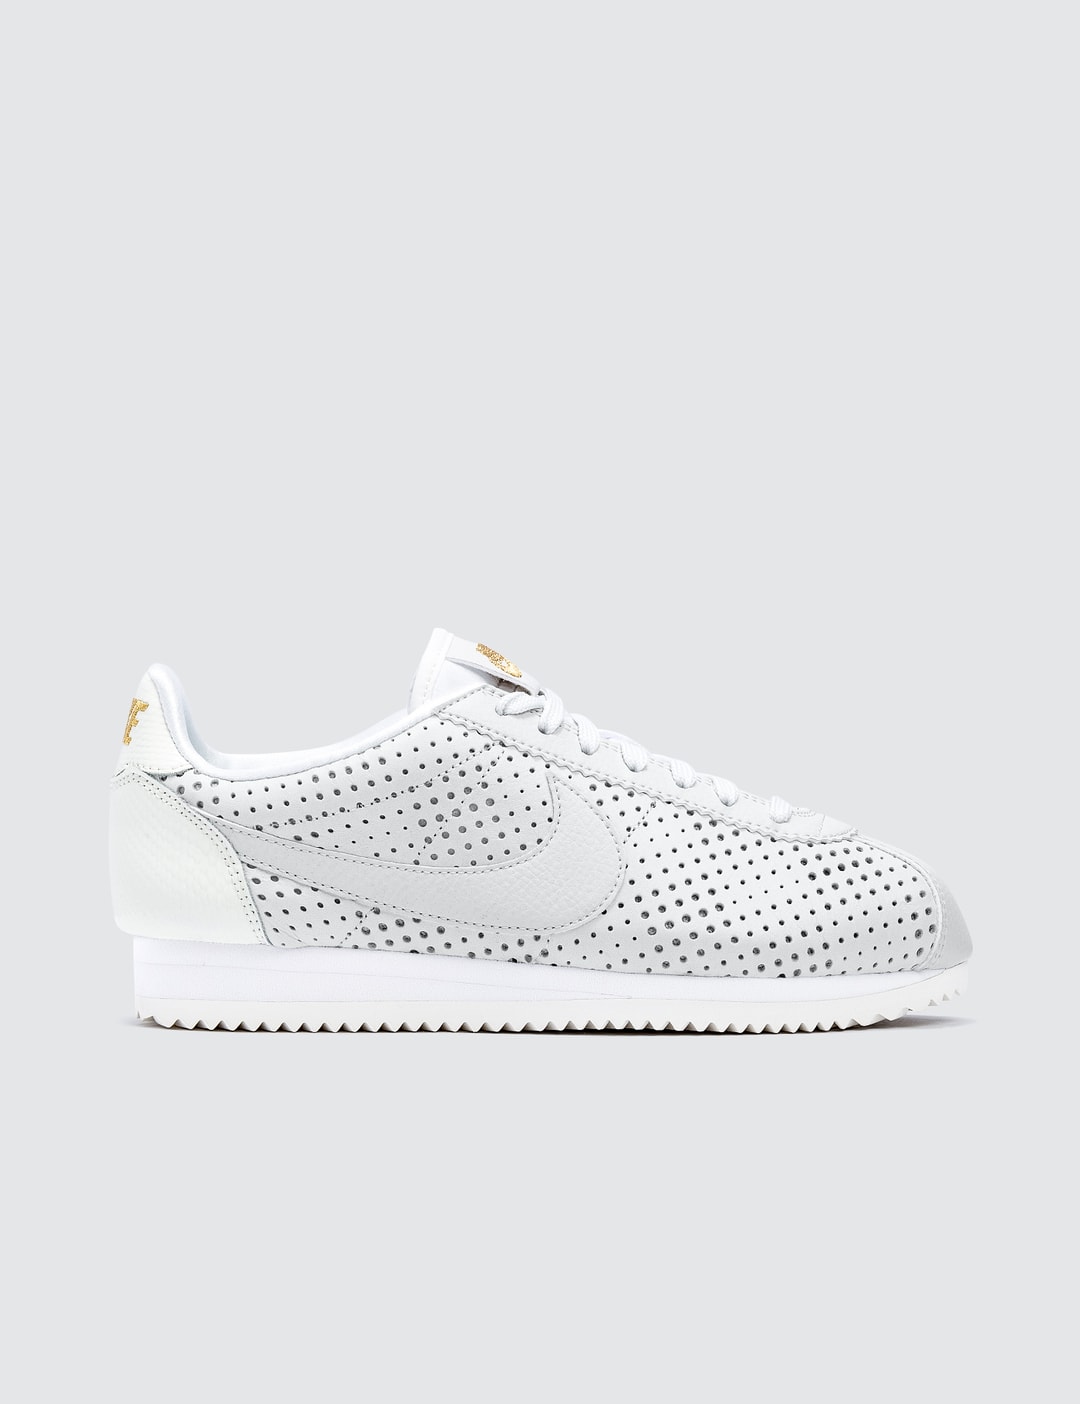 Escandaloso Parásito prima Nike - W Nike Cortez Classic SE PRM | HBX - Globally Curated Fashion and  Lifestyle by Hypebeast